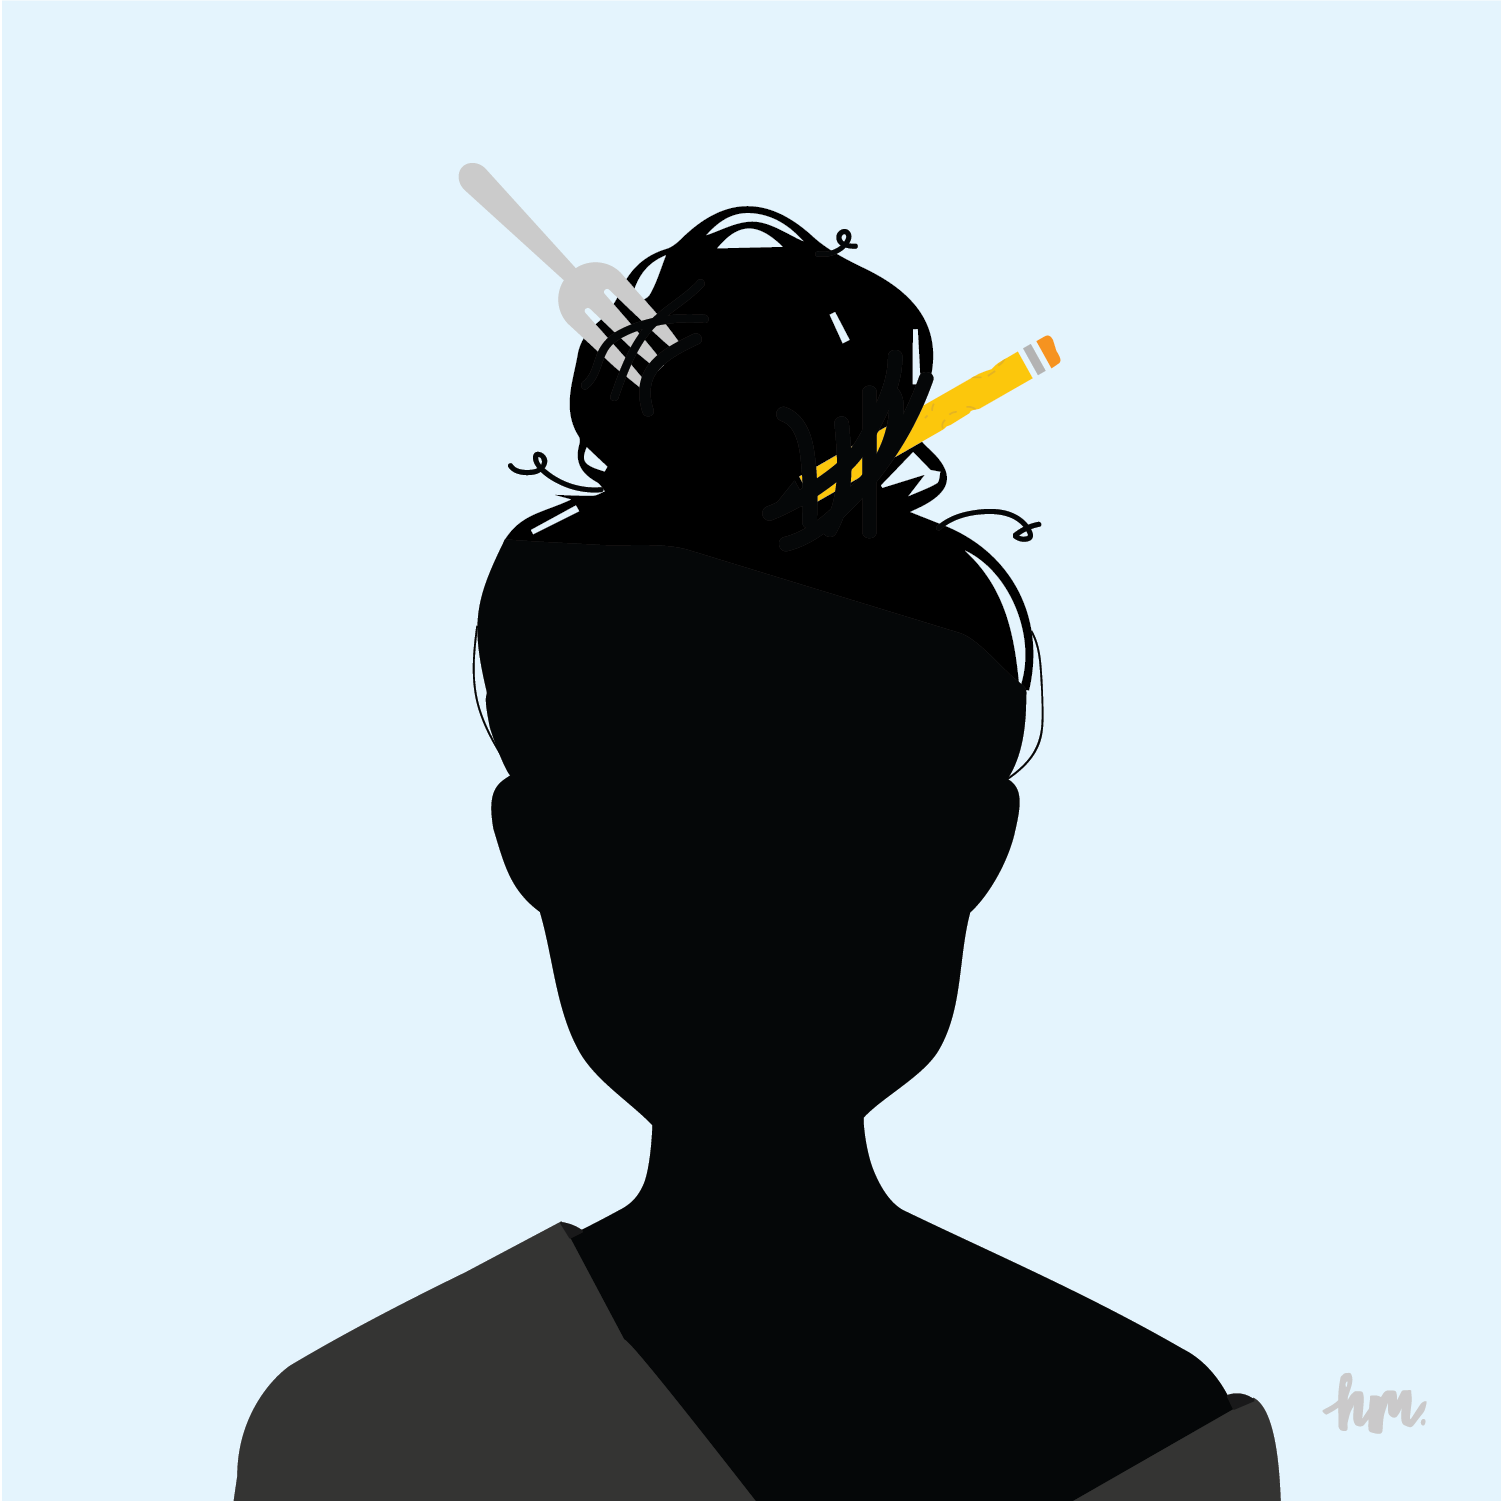 Silhouette of Honey with a chewed pencil and a fork stuck in a bun on her head